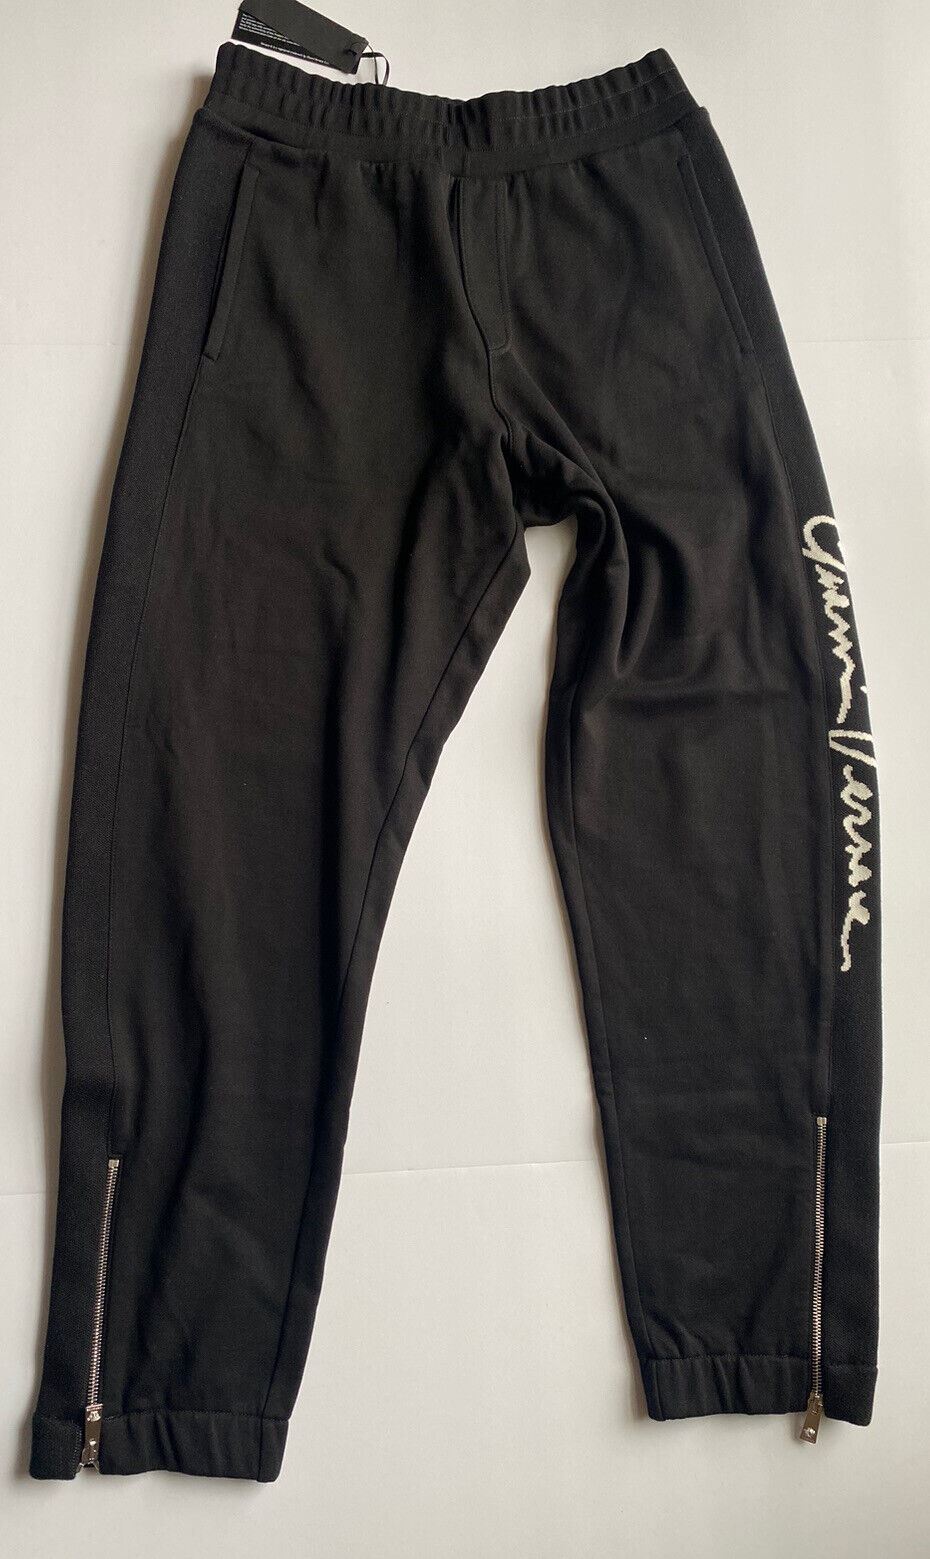 NWT $850 Versace Men's Black Mitchel Fit Pants Size Medium Made in Italy A86887